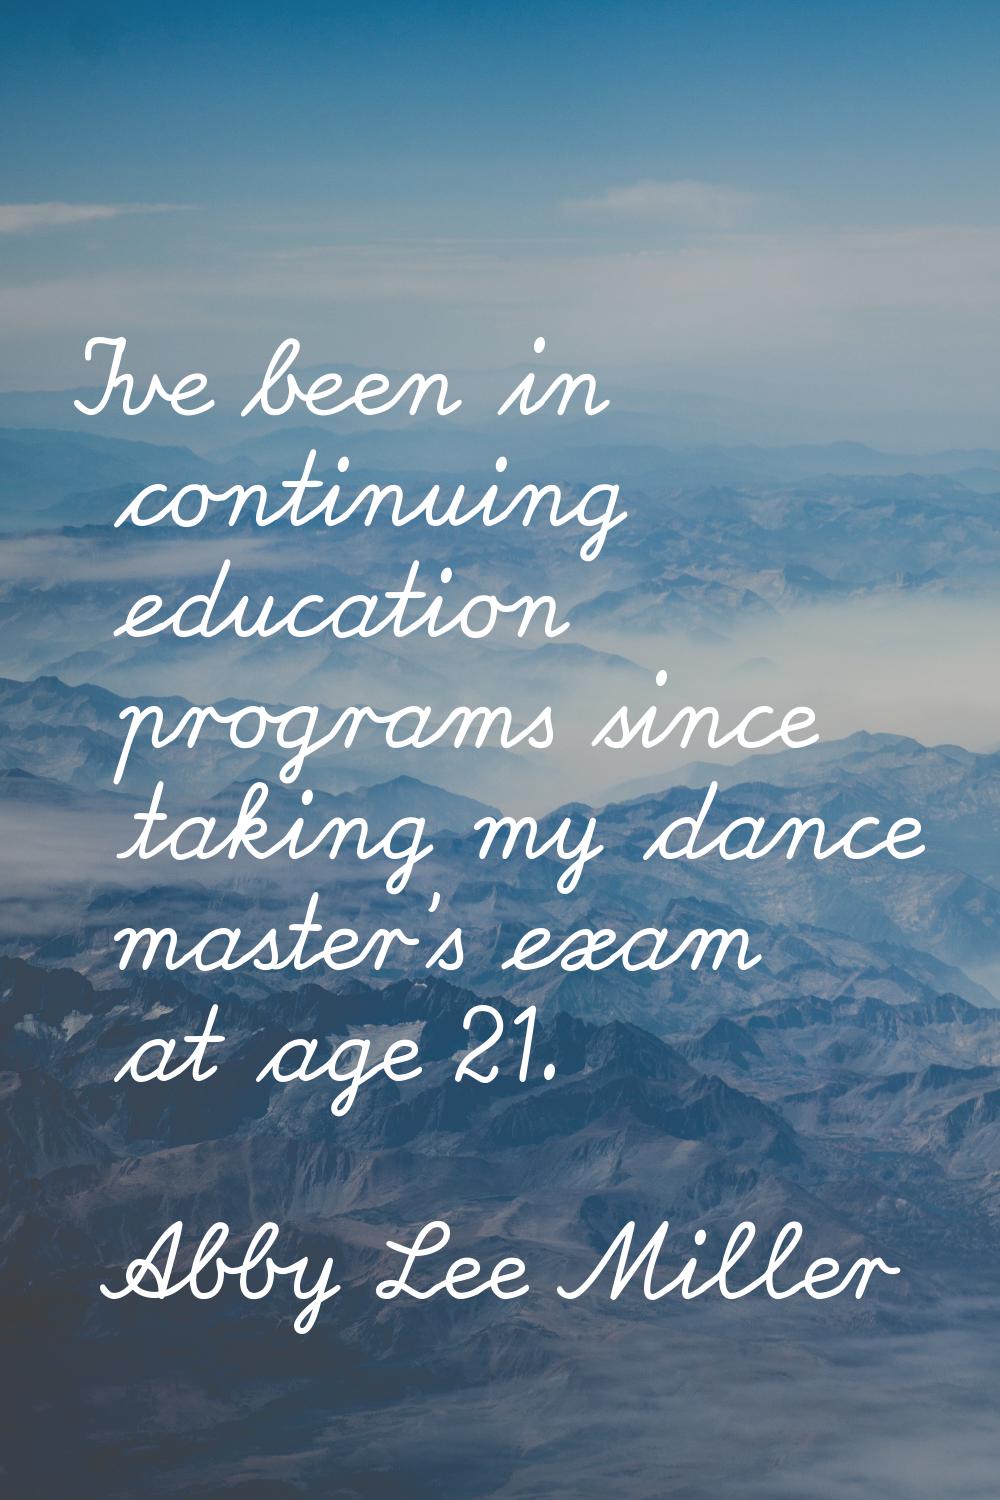 I've been in continuing education programs since taking my dance master's exam at age 21.